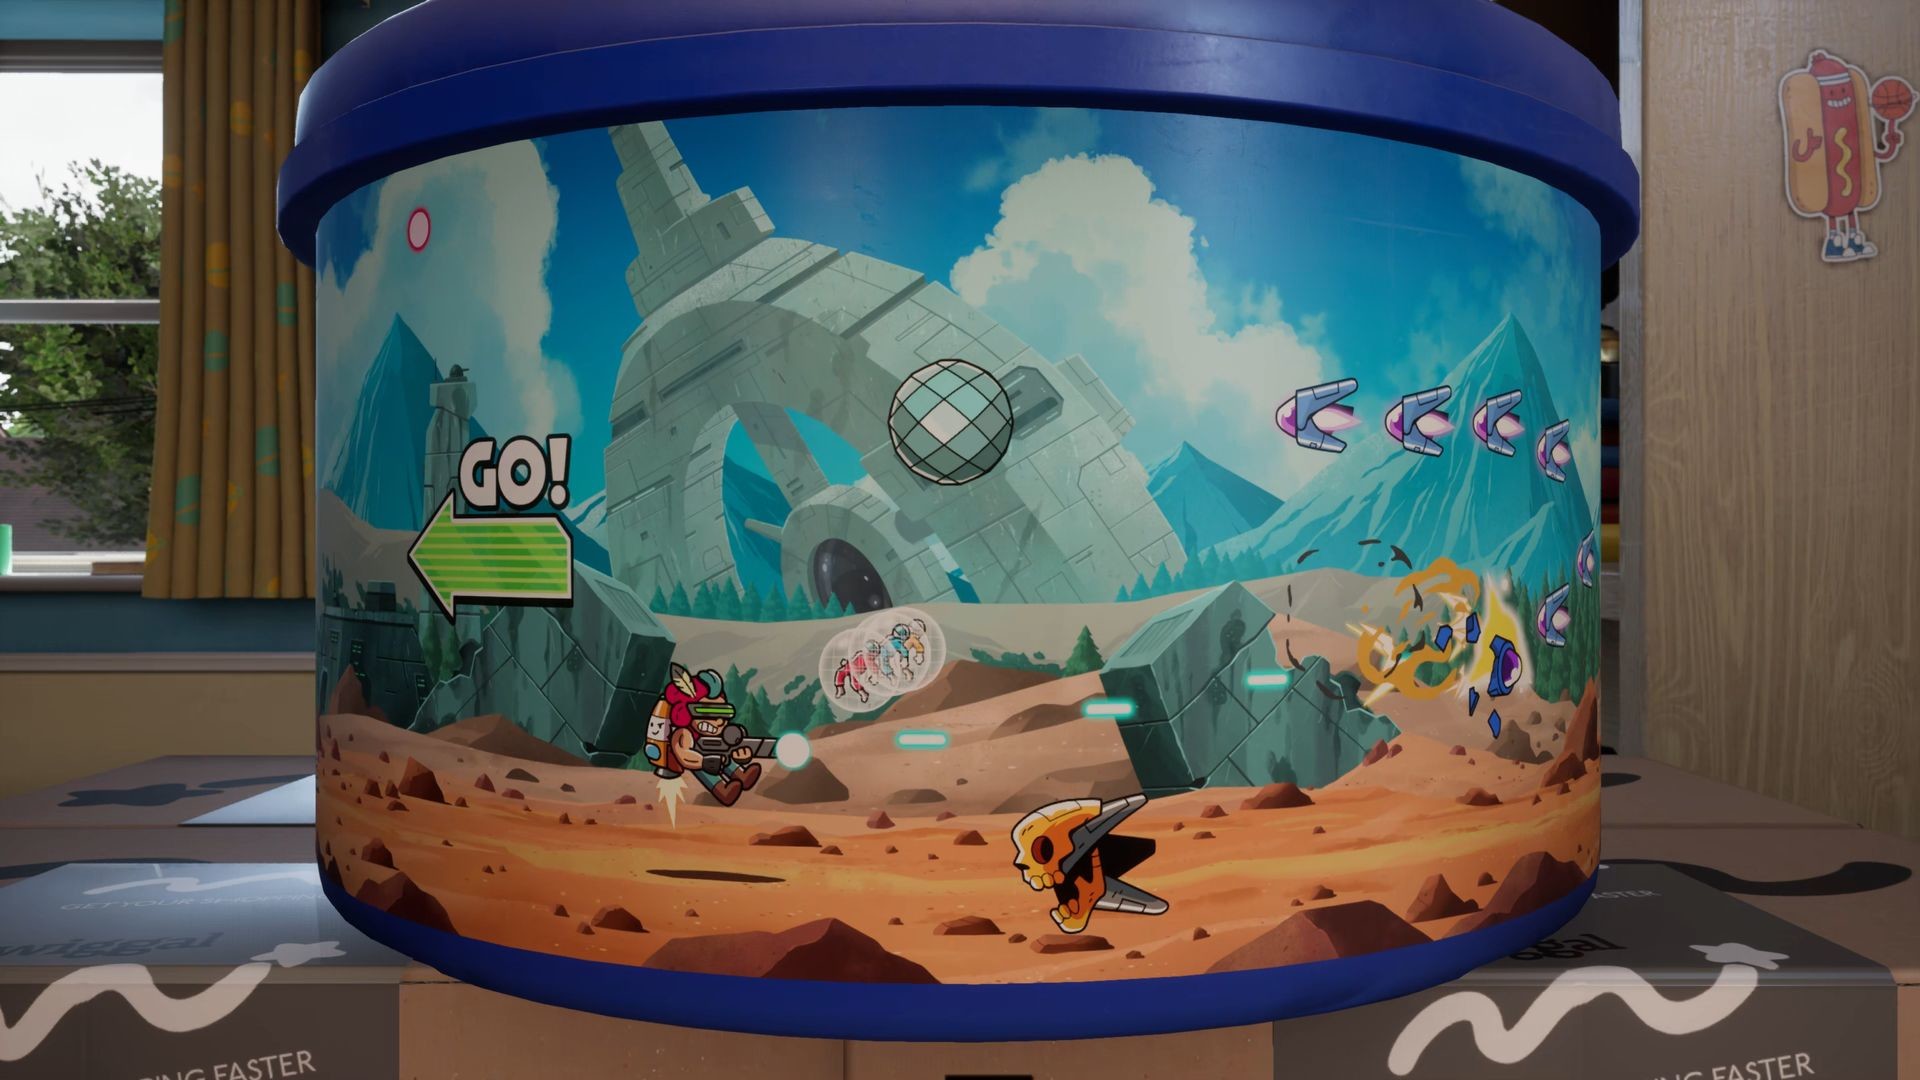 Shmup gameplay wrapping around the side of a cylindrical container